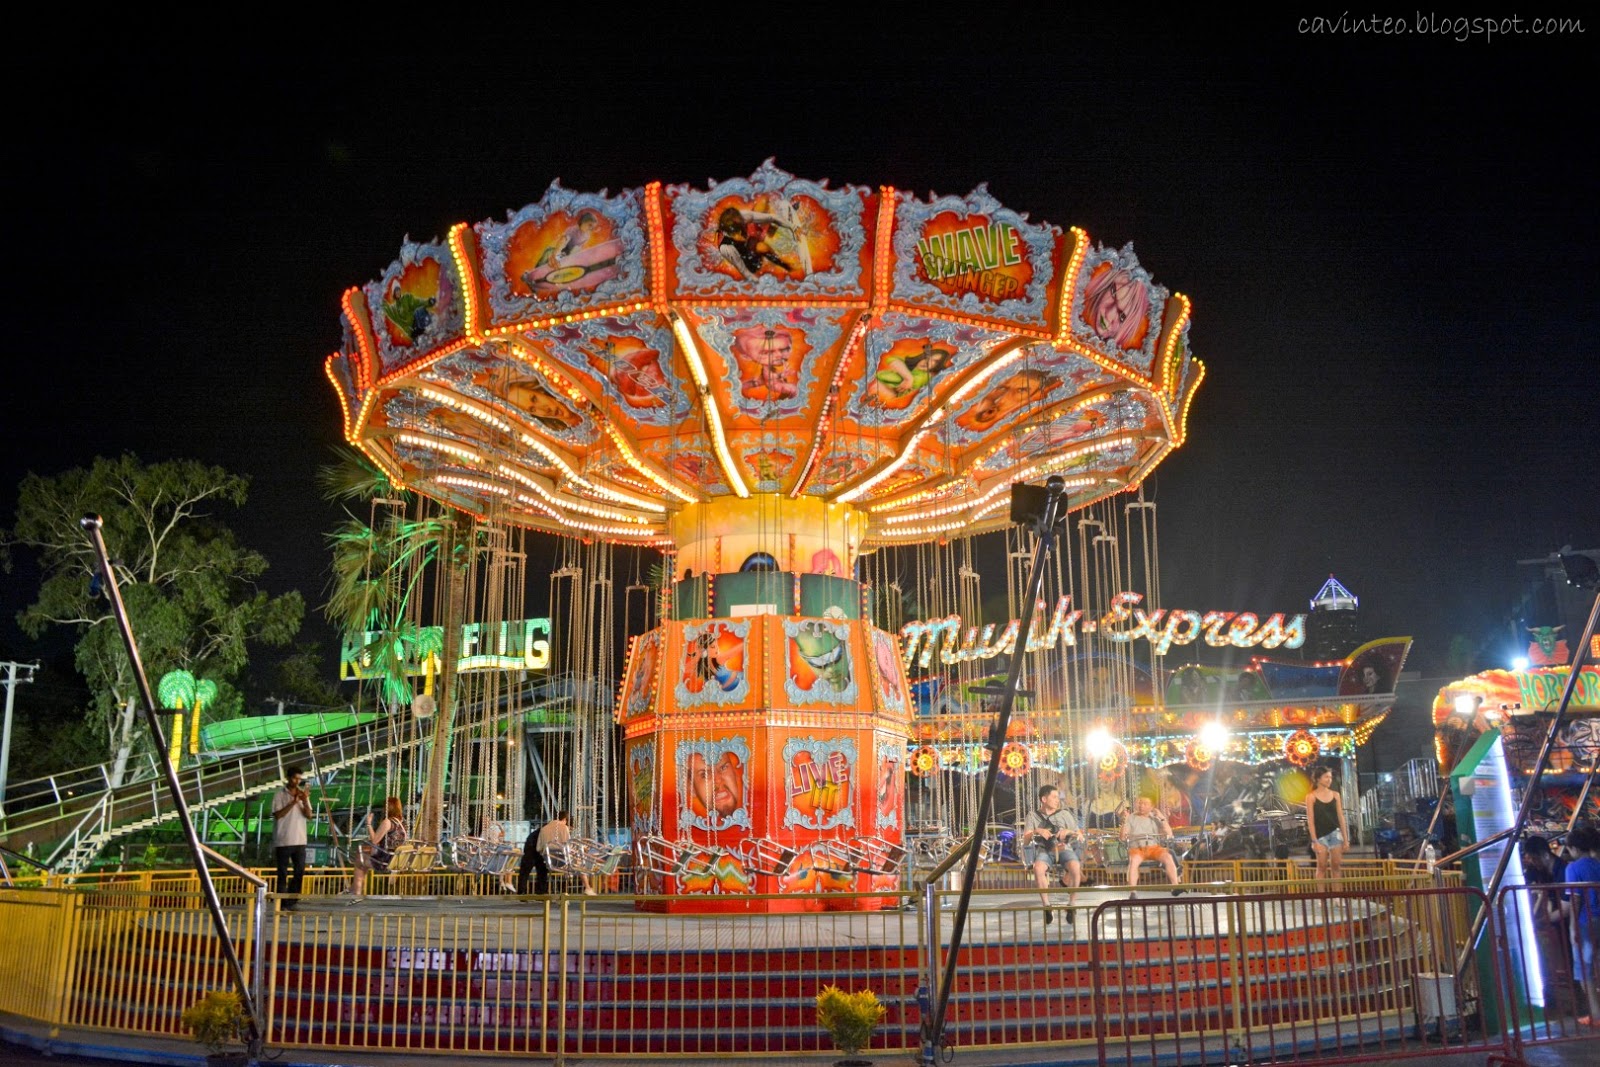 Entree Kibbles Global Carnival Amusement Park by Chang Beer Bangkok Lumphini Square (Next to Neon Fest) Thailand picture